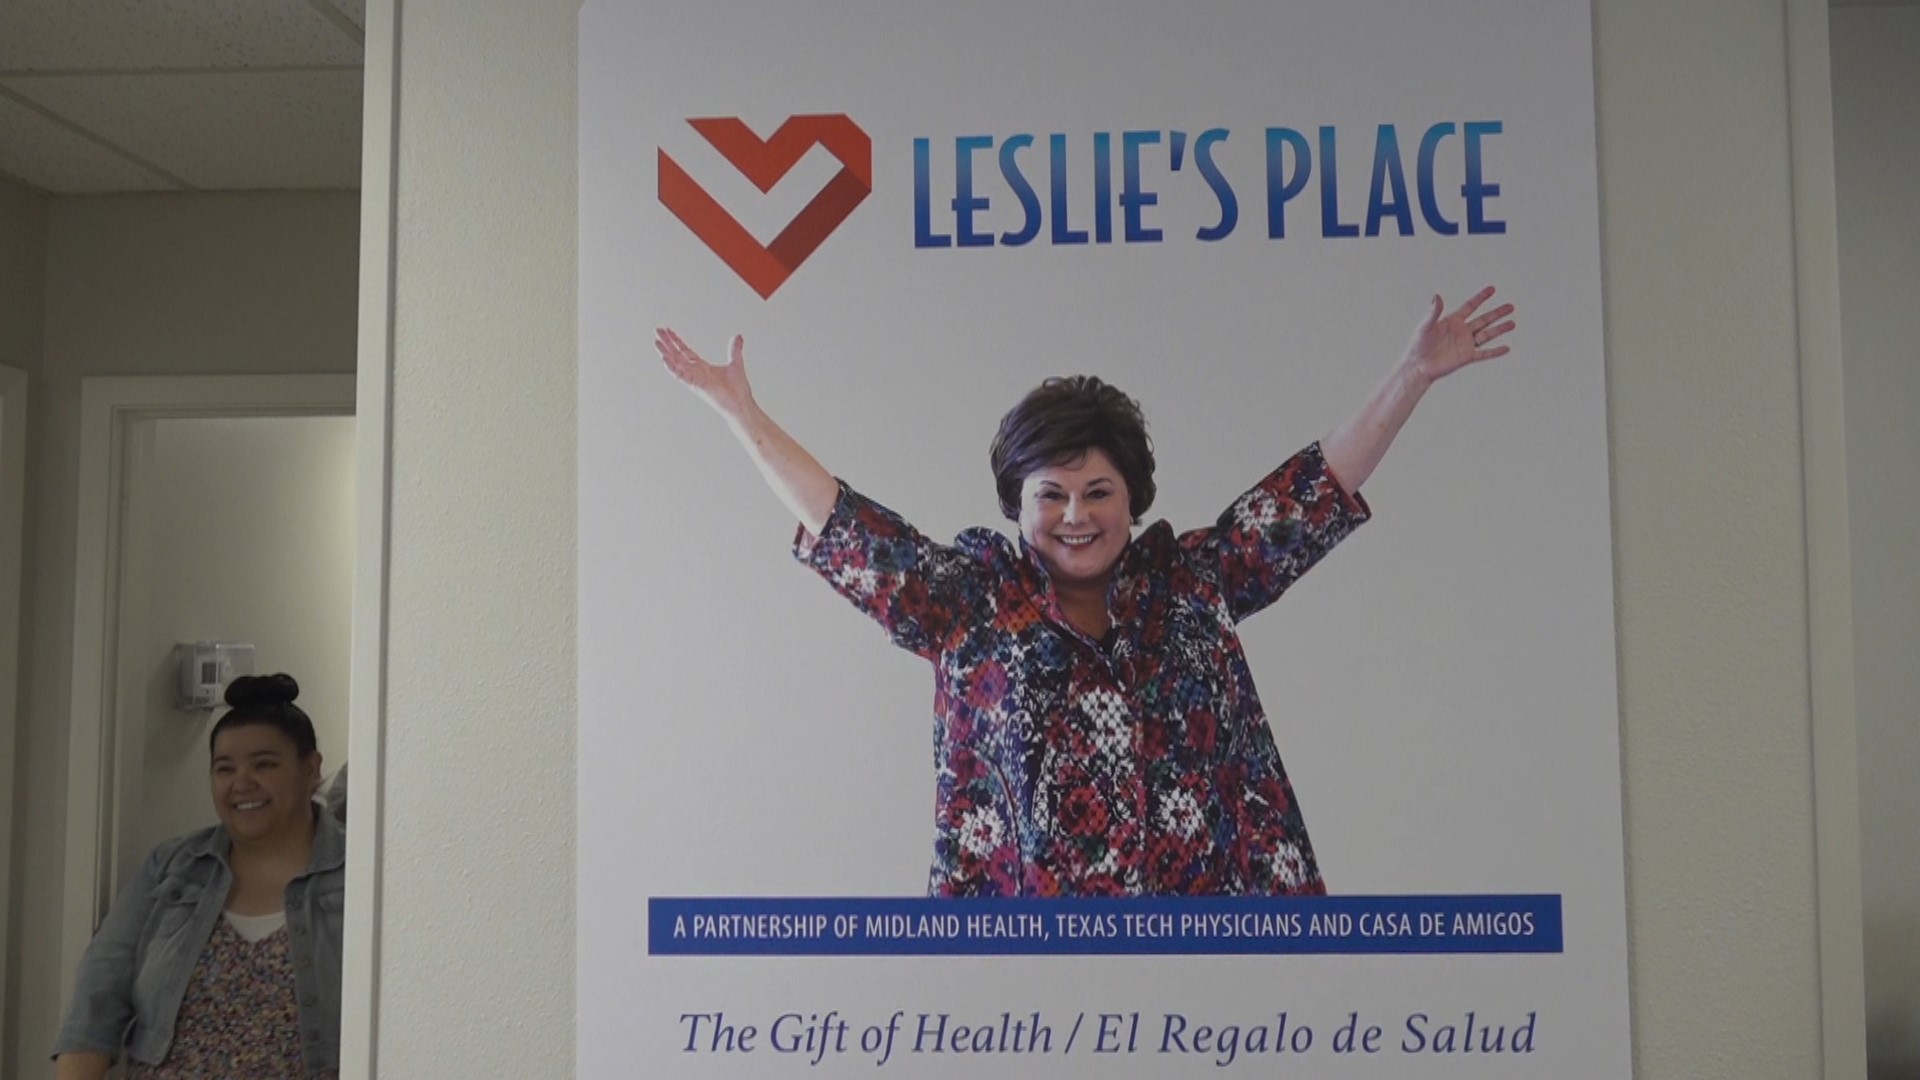 Leslie's Place was started in honor of Leslie Hendrix Wood, a Midland woman who died from COVID in 2021. While sick, she had a vision of helping a community in need.